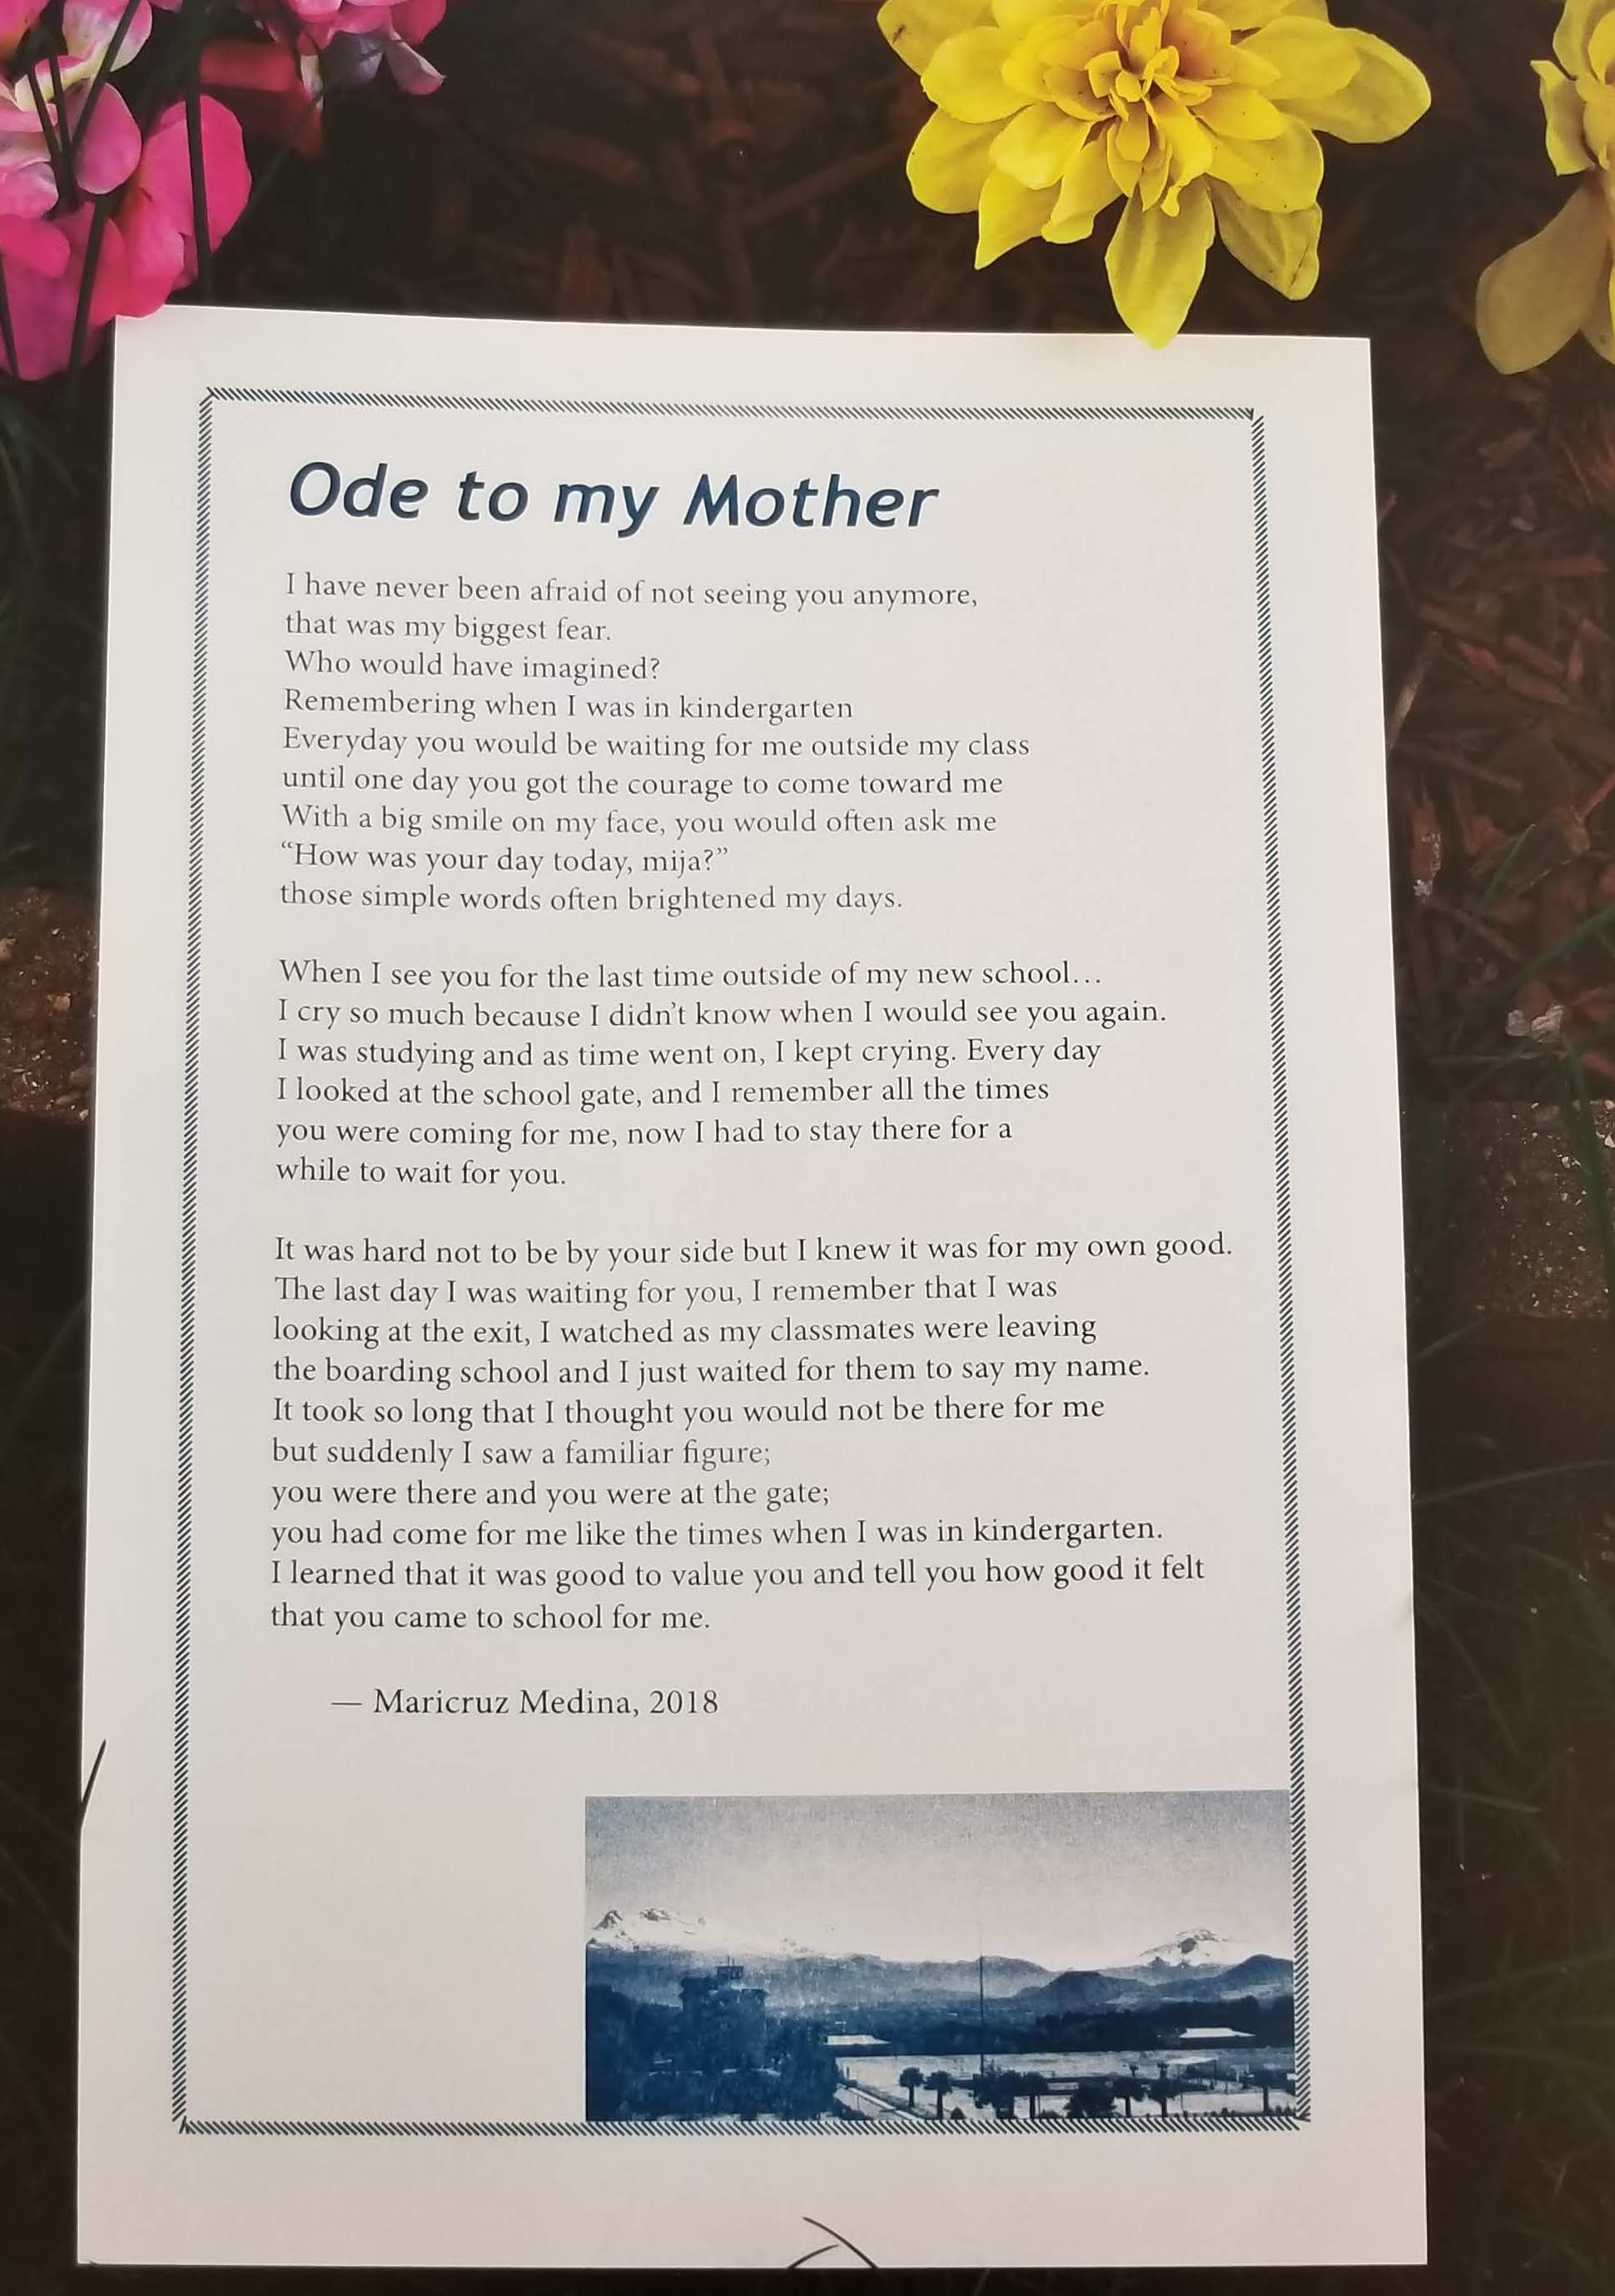 ode poems for kids